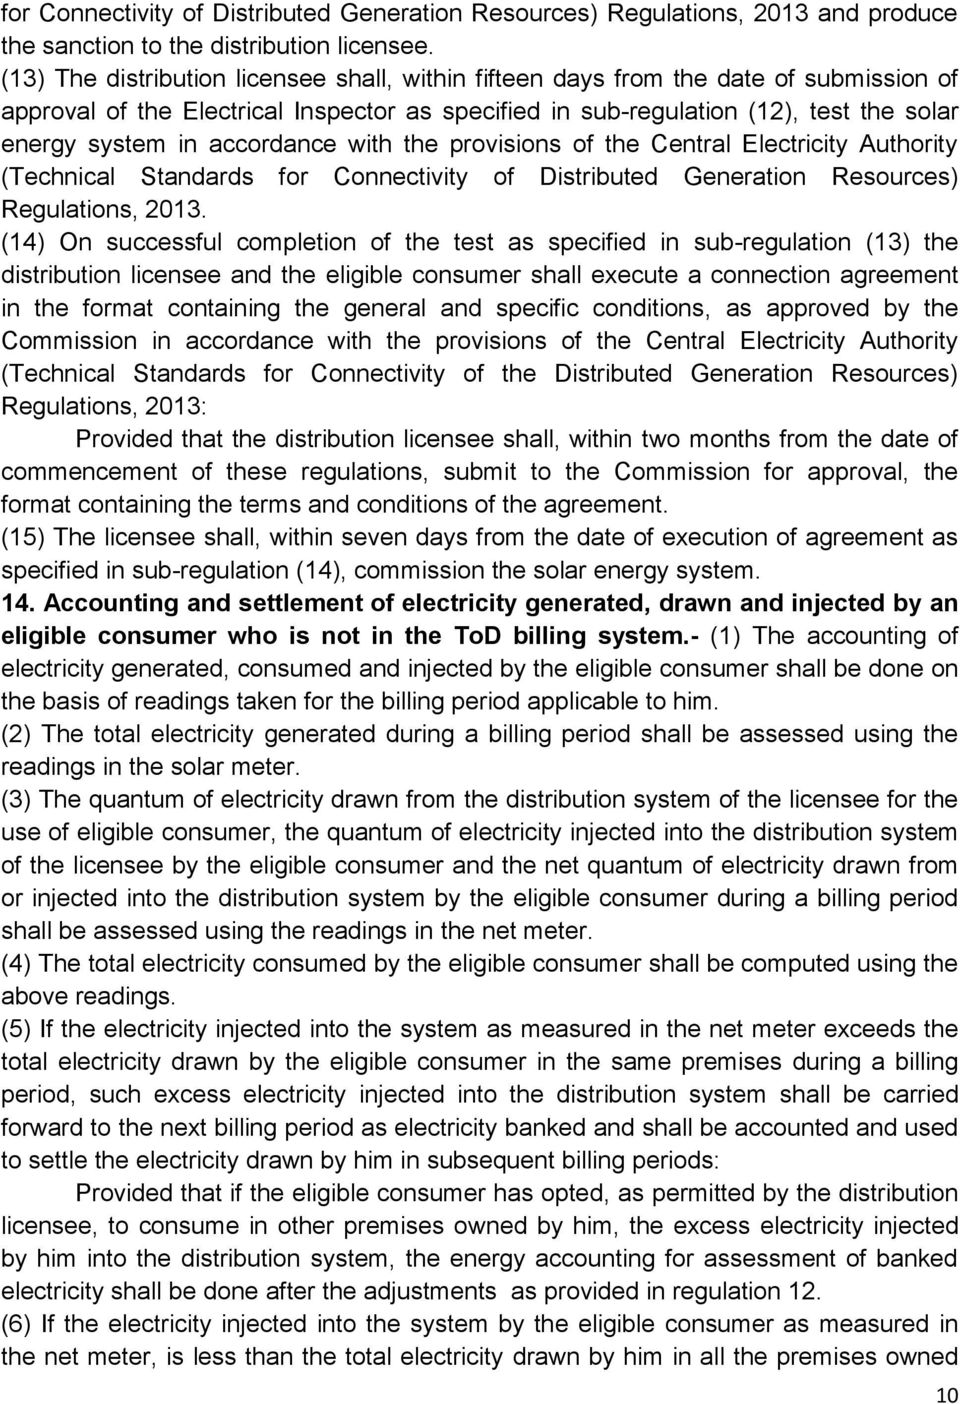 accordance with the provisions of the Central Electricity Authority (Technical Standards for Connectivity of Distributed Generation Resources) Regulations, 2013.